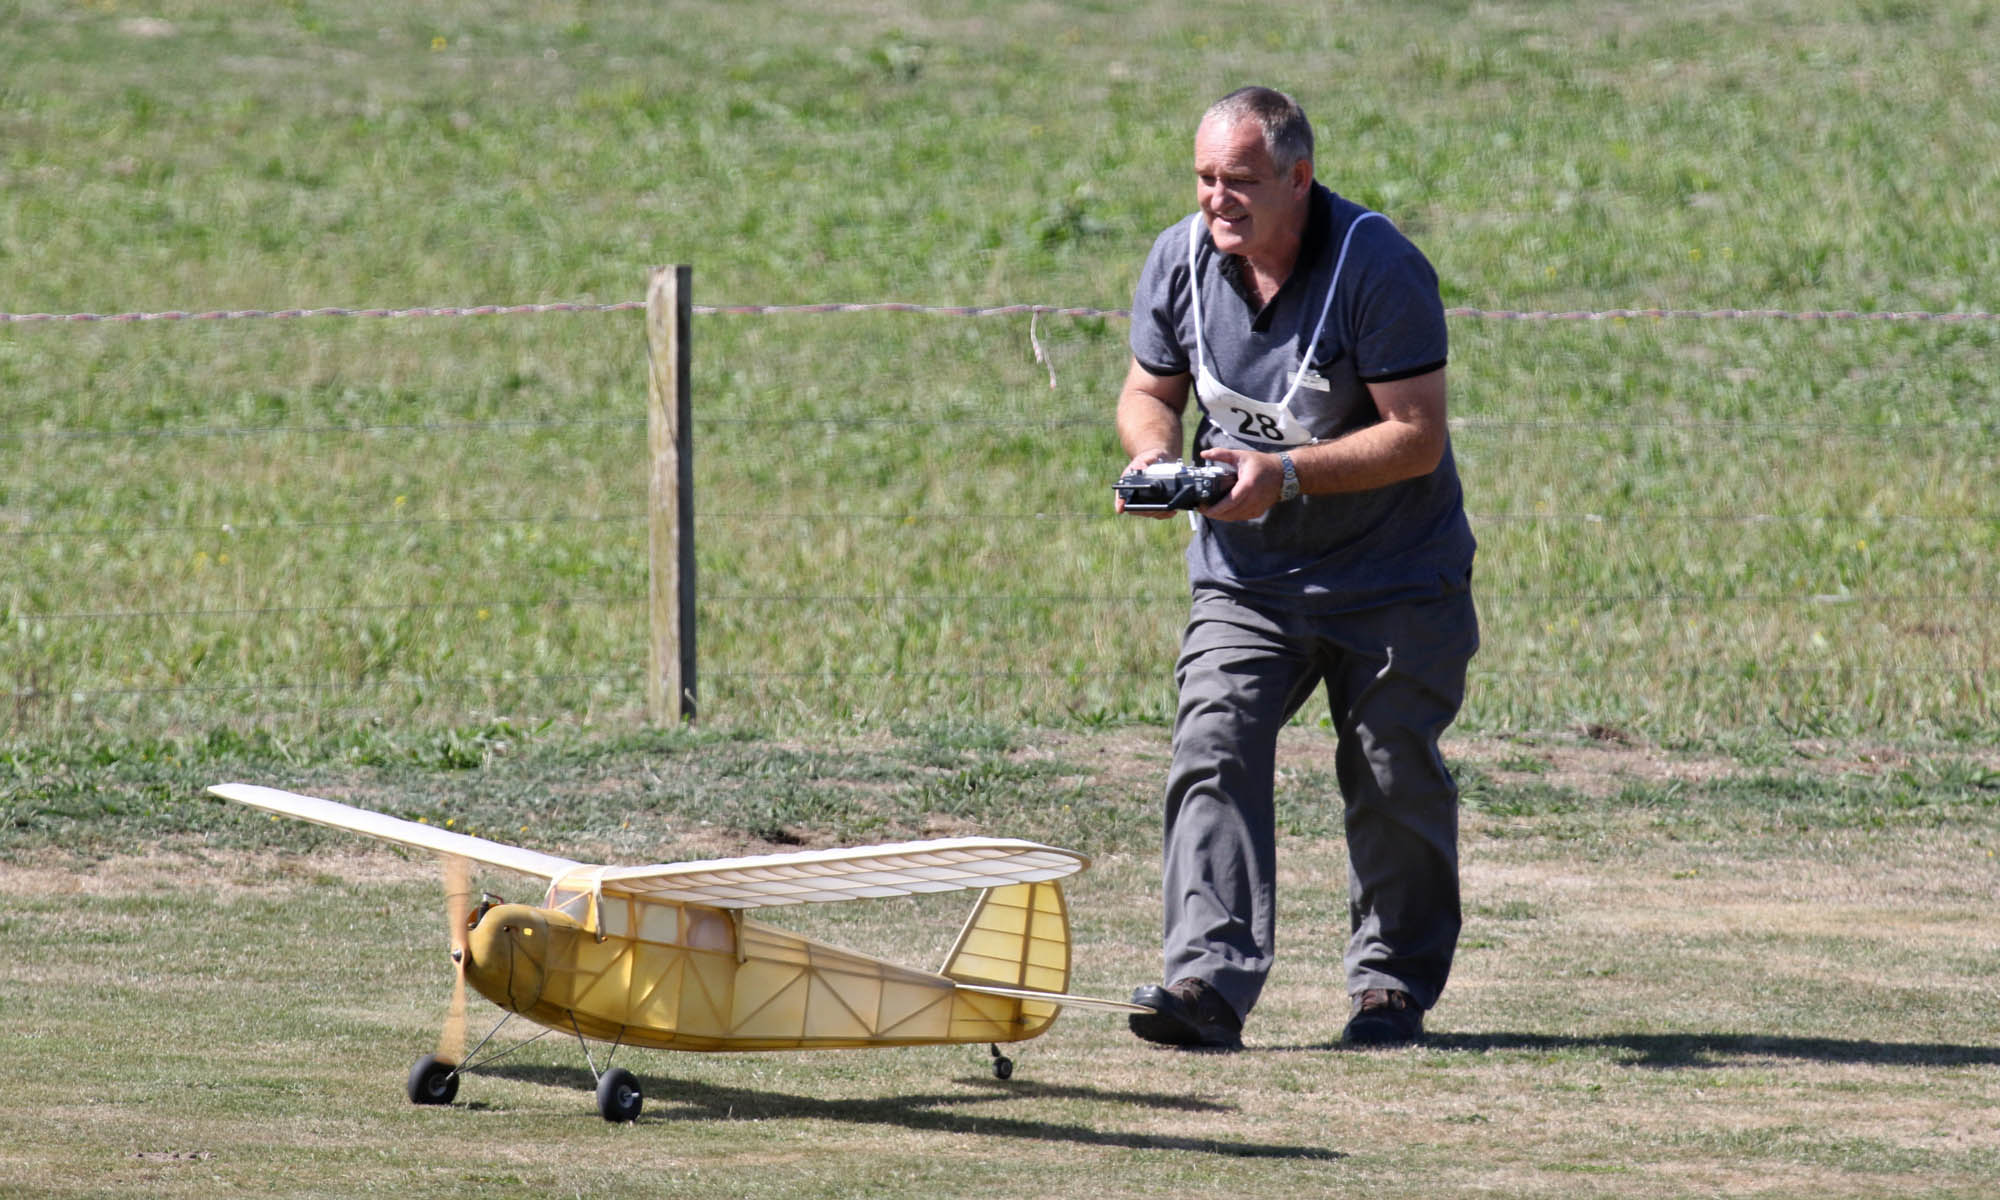 Ian Munro coaxing his Brown Jnr engined plane to take off, 0T8A8683.jpg